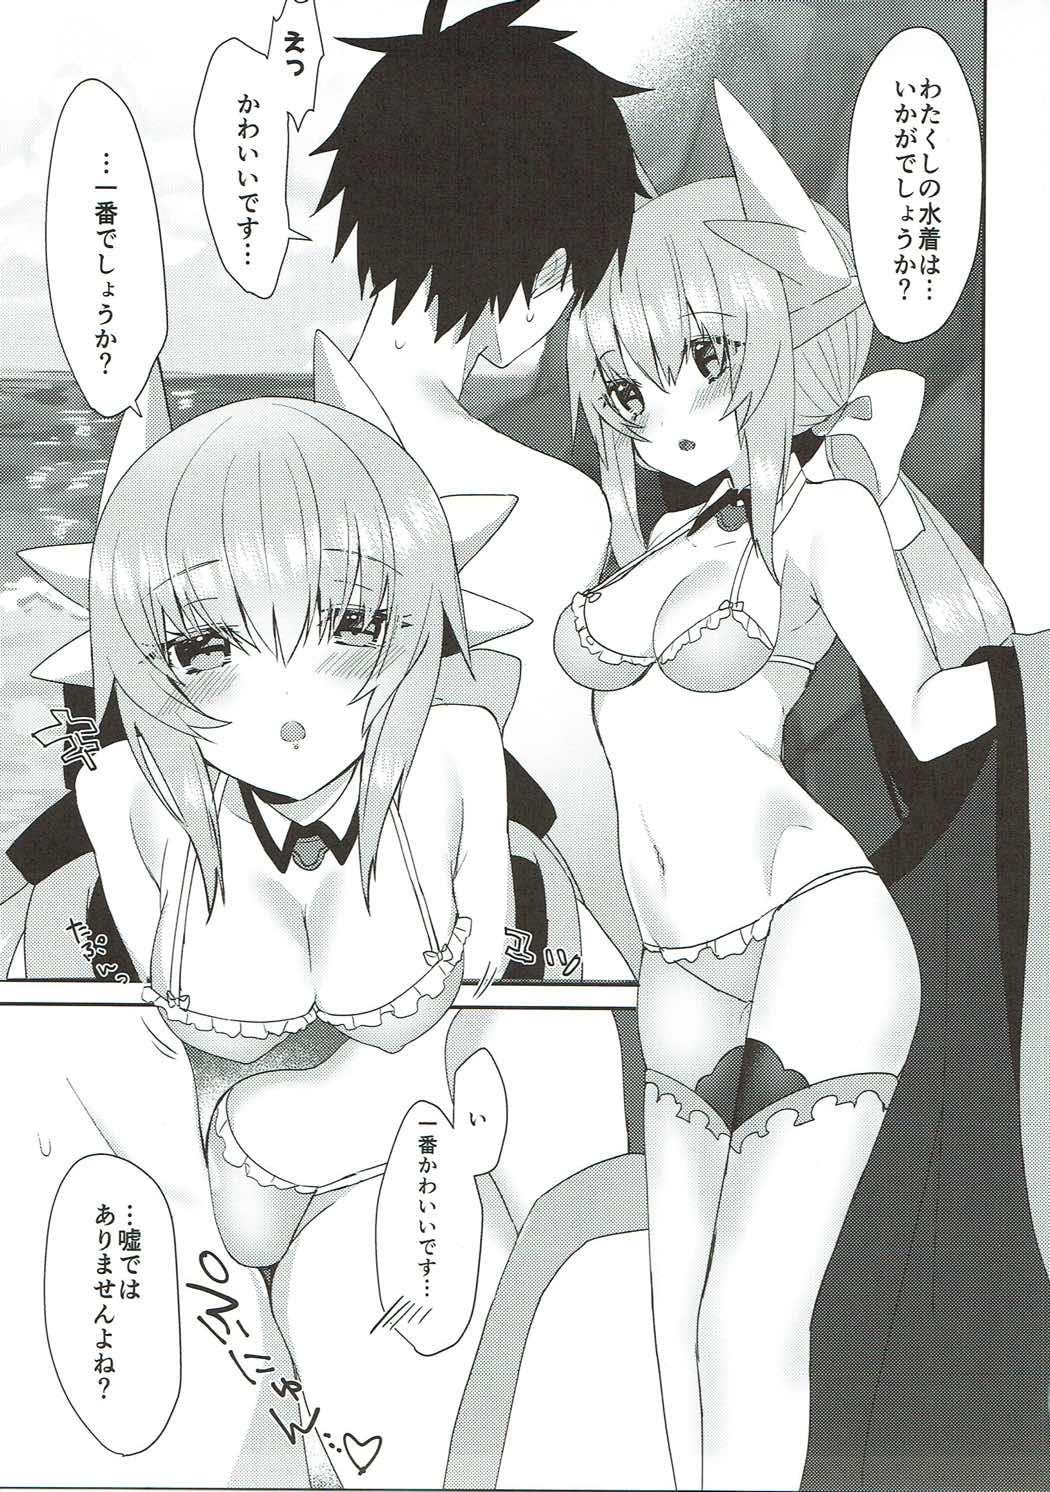 White Chick Kiyohime Summer! - Fate grand order Ex Girlfriends - Page 6